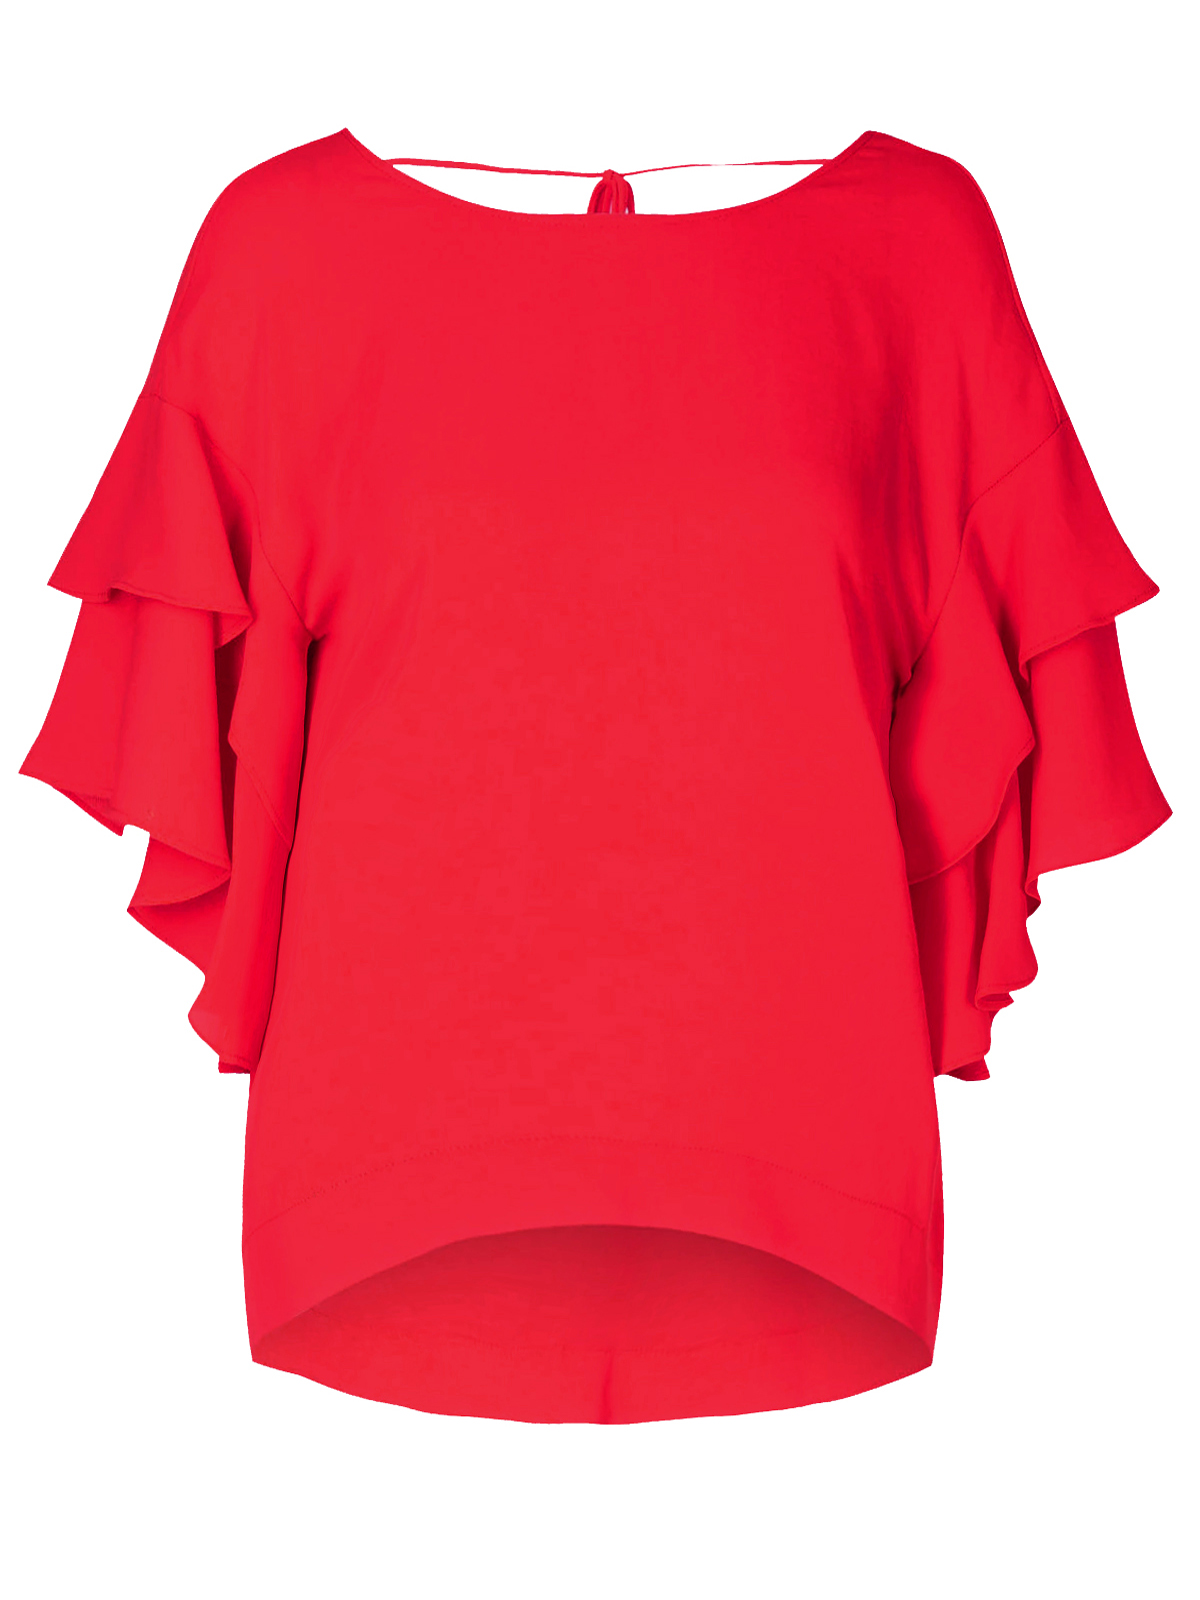 Marks and Spencer - - M&5 RED Flamenco Sleeve Shell Top - Size 12